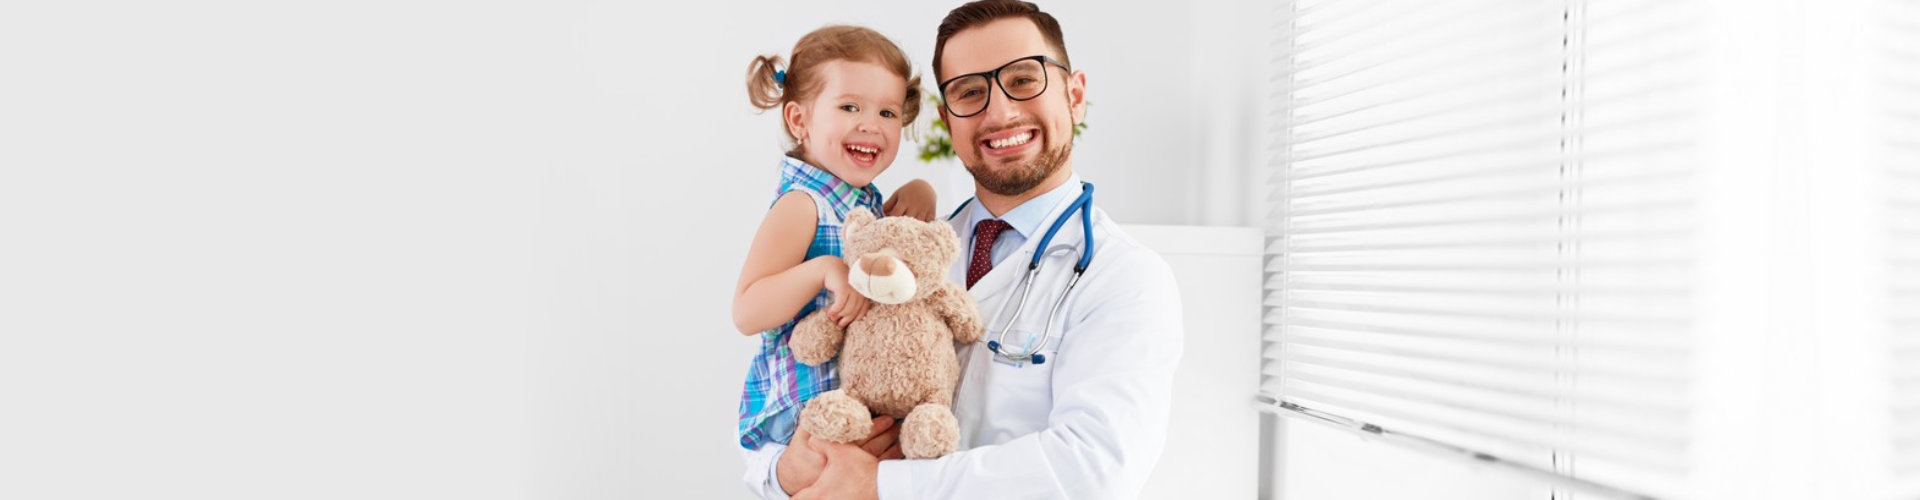 doctor and child smiling